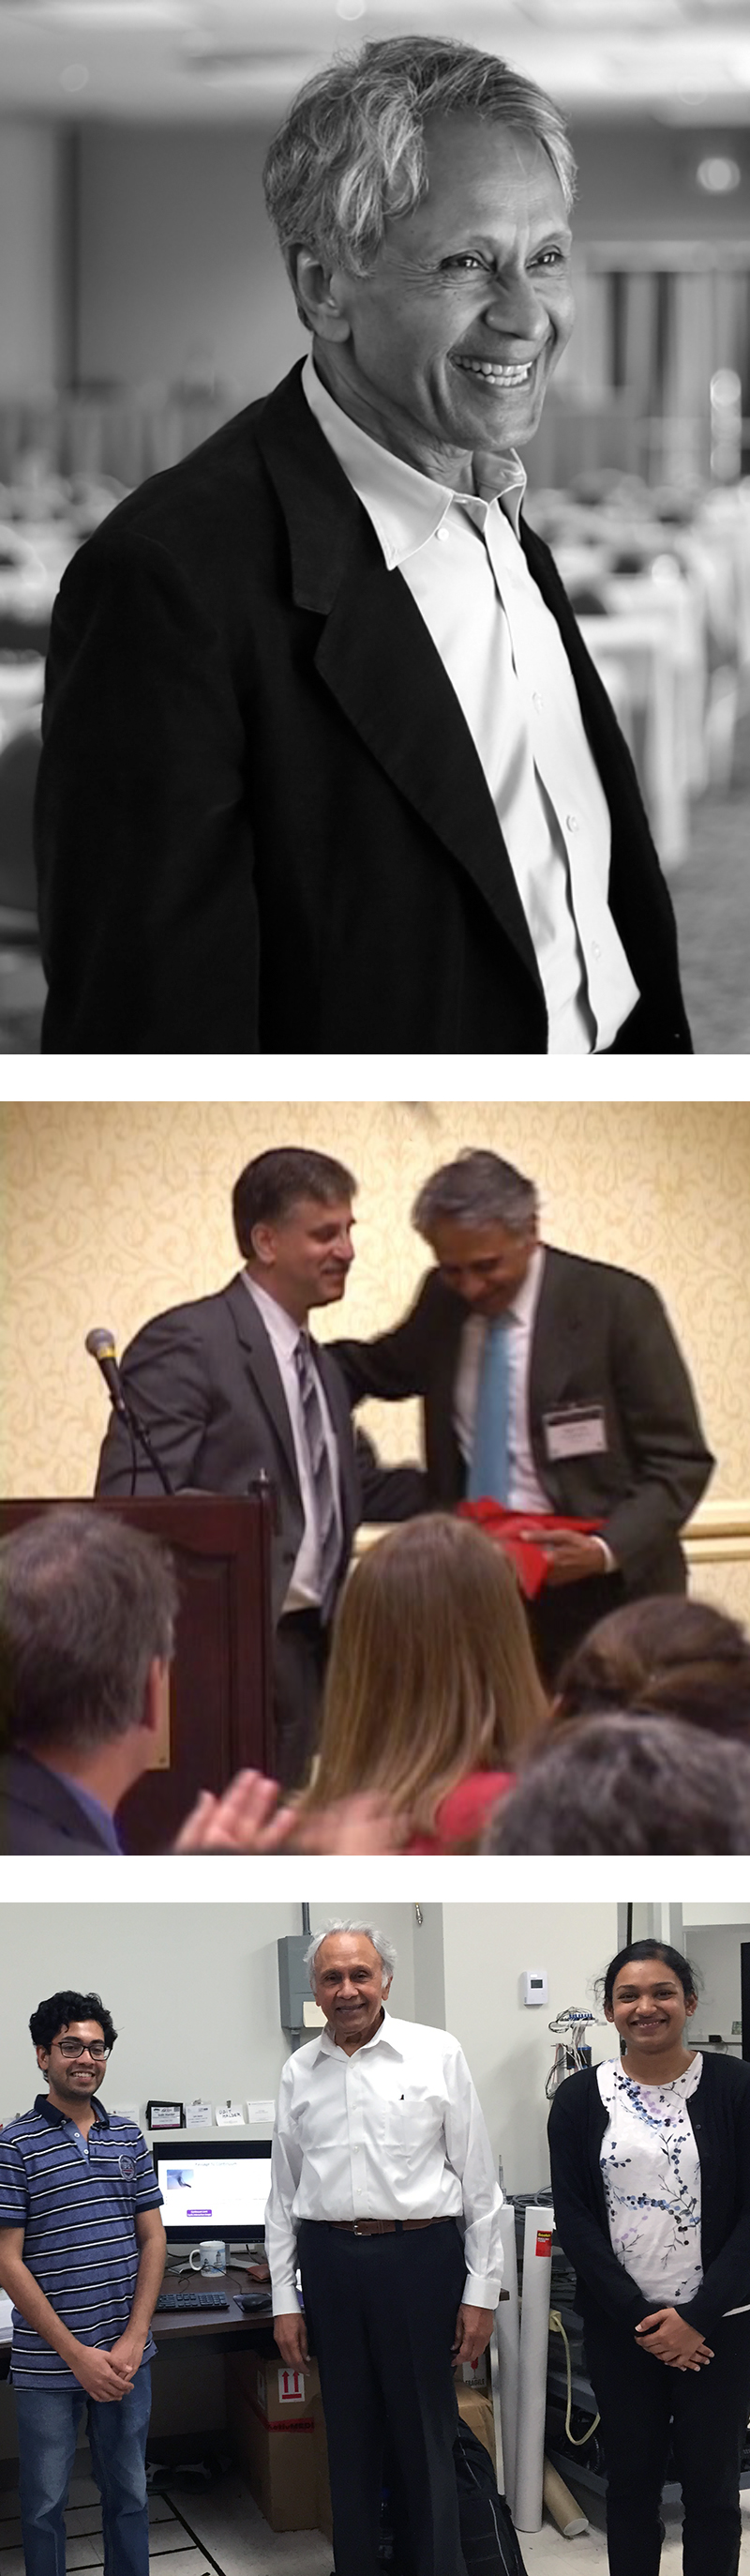 Top: Pravin Varaiya. Center: Eyad Abed with Pravin Varaiya at the 2005 Symposium honoring him. Bottom: Varaiya with then-graduate students Udit Halder (ECE Ph.D. 2019) and Vidya Raju (ECE Ph.D. 2019) in the Intelligent Servosystems Laboratory during his 2019 visit to ISR. He heard them describe work completed in their doctoral dissertations, on subjects ranging from evolutionary game theory and related controllability questions to optimal control and models of natural and synthetic flocks. Their advisor, Professor P. S. Krishnaprasad writes, “It was an inspiring occasion for the students to meet one of the great figures of the field of system science and to exchange ideas.”